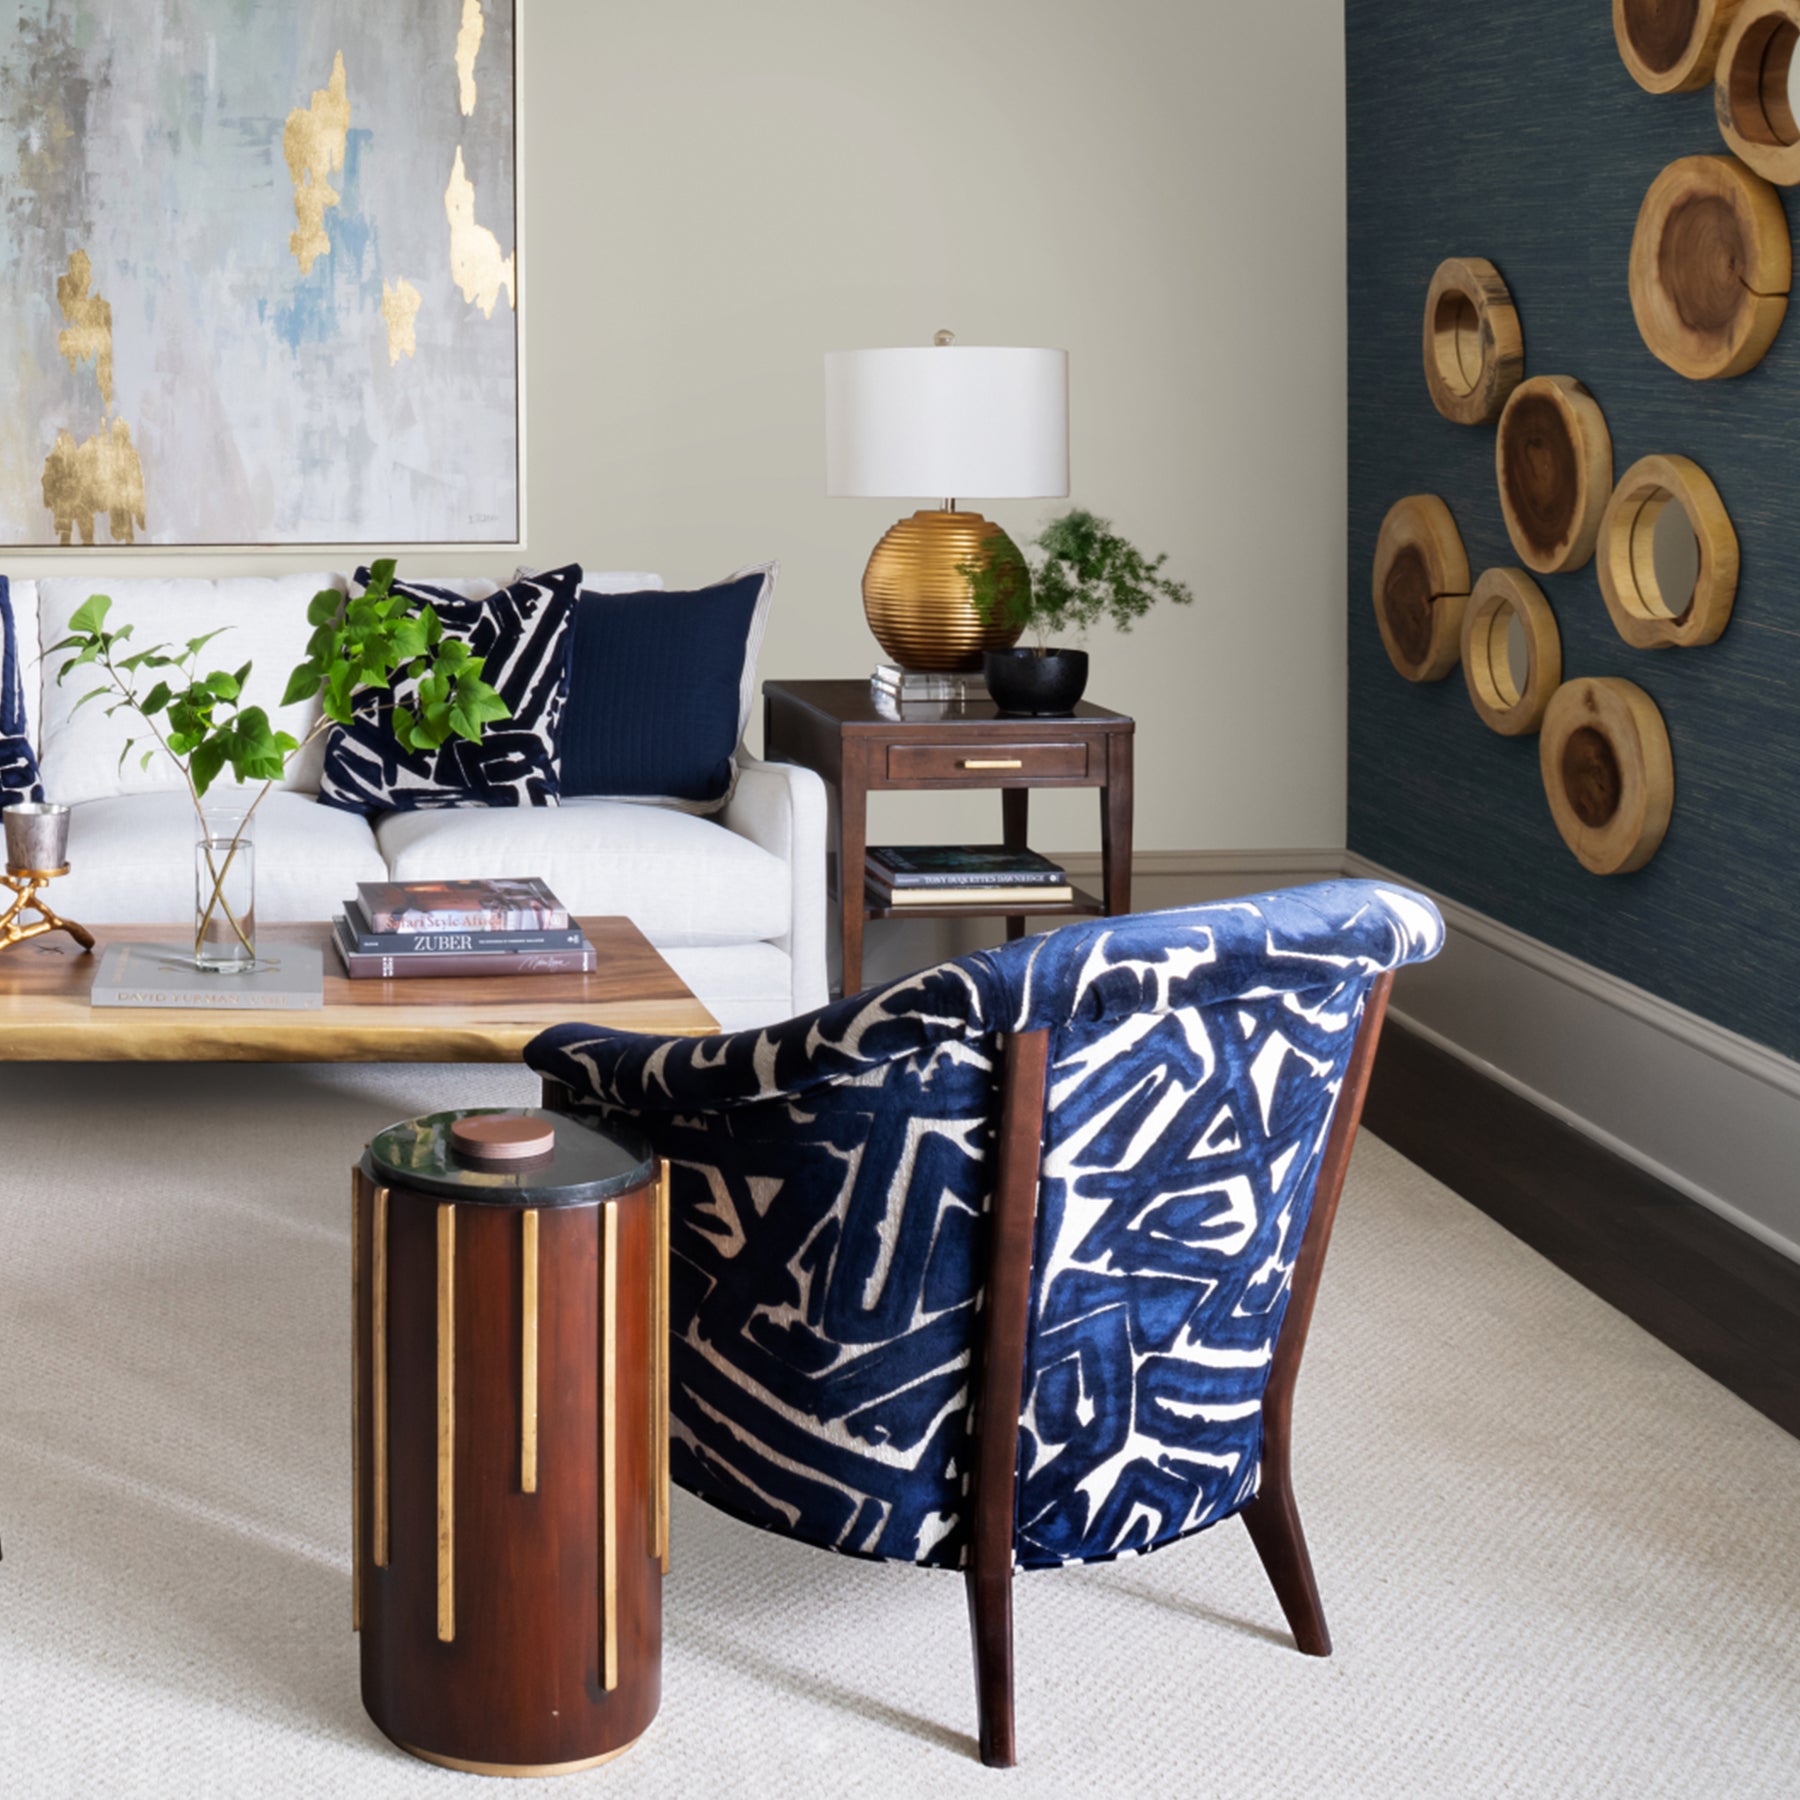 Interior Design photo from Northern Virginia condo showing patterned club chair and drink table by Jamie Merida